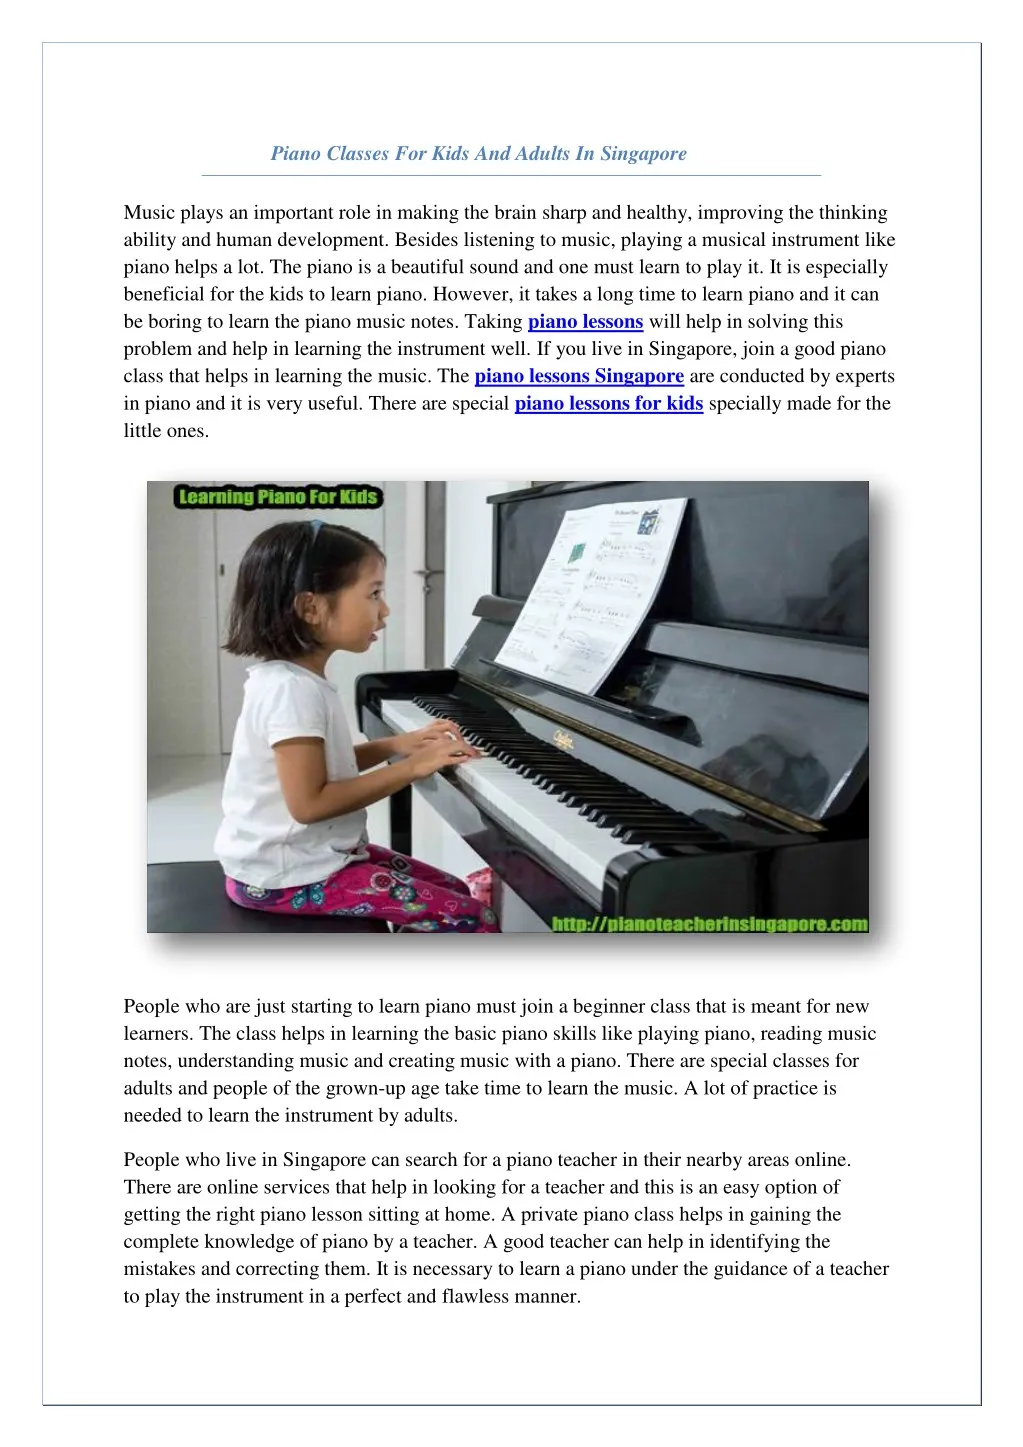 piano classes for kids and adults in singapore